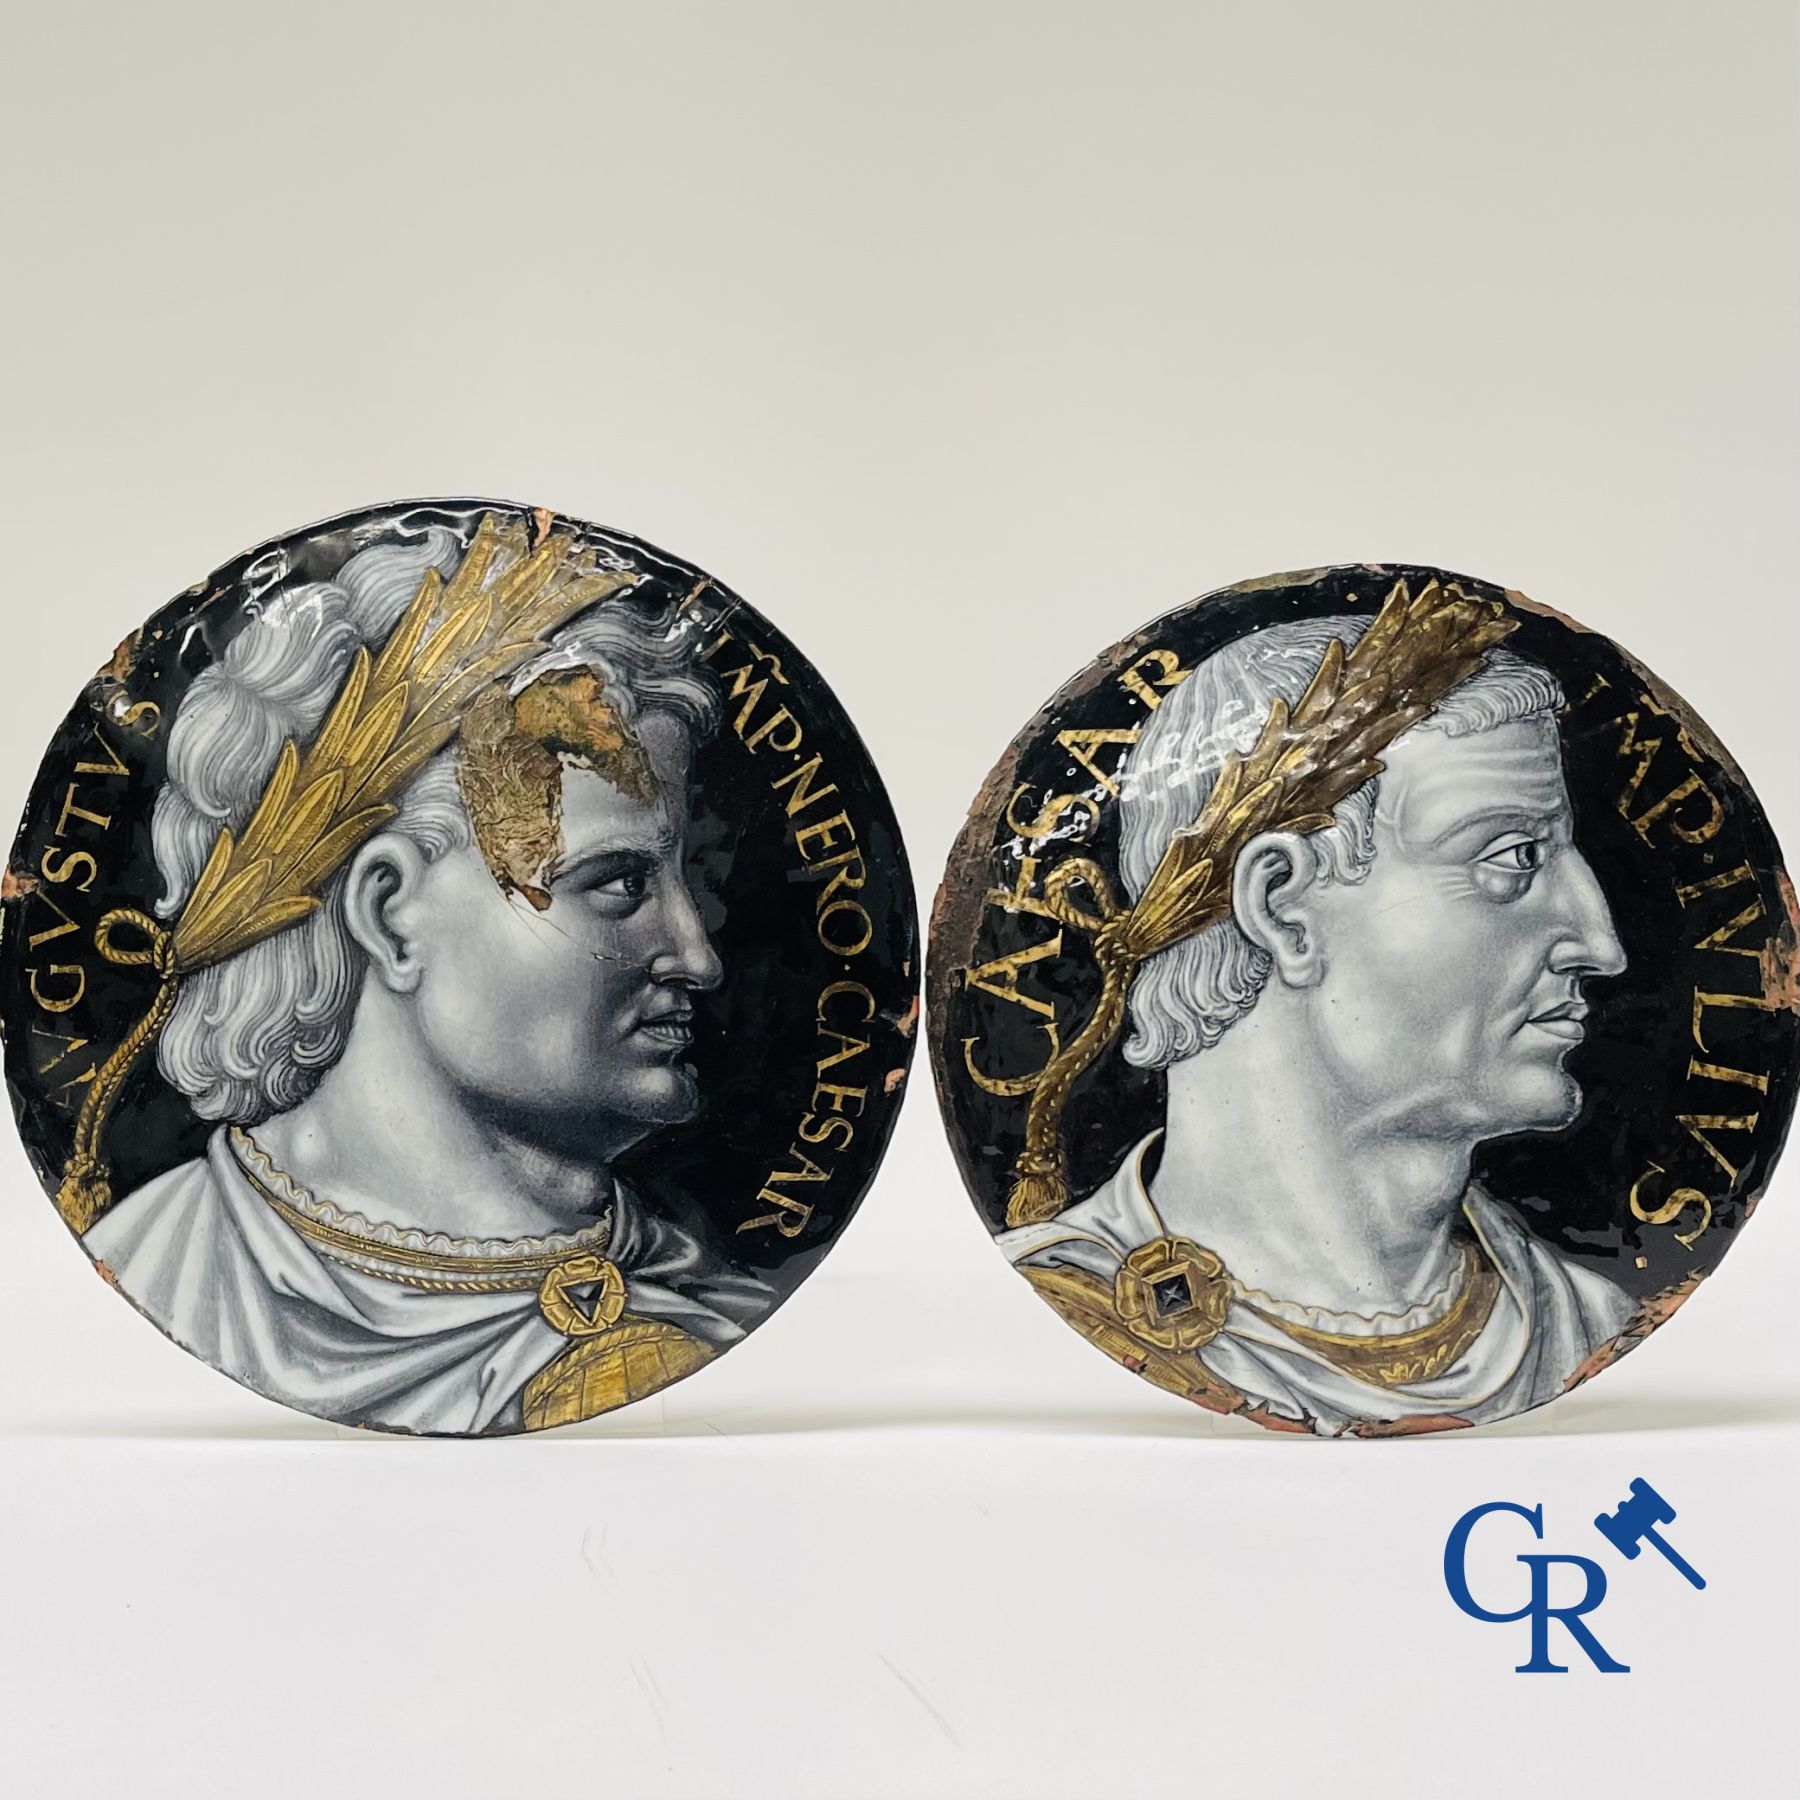 Limoges: In the manner of Jacques Laudin I. 2 medallions with the profile of Emperor Nero and Julius Caesar. 17th century.